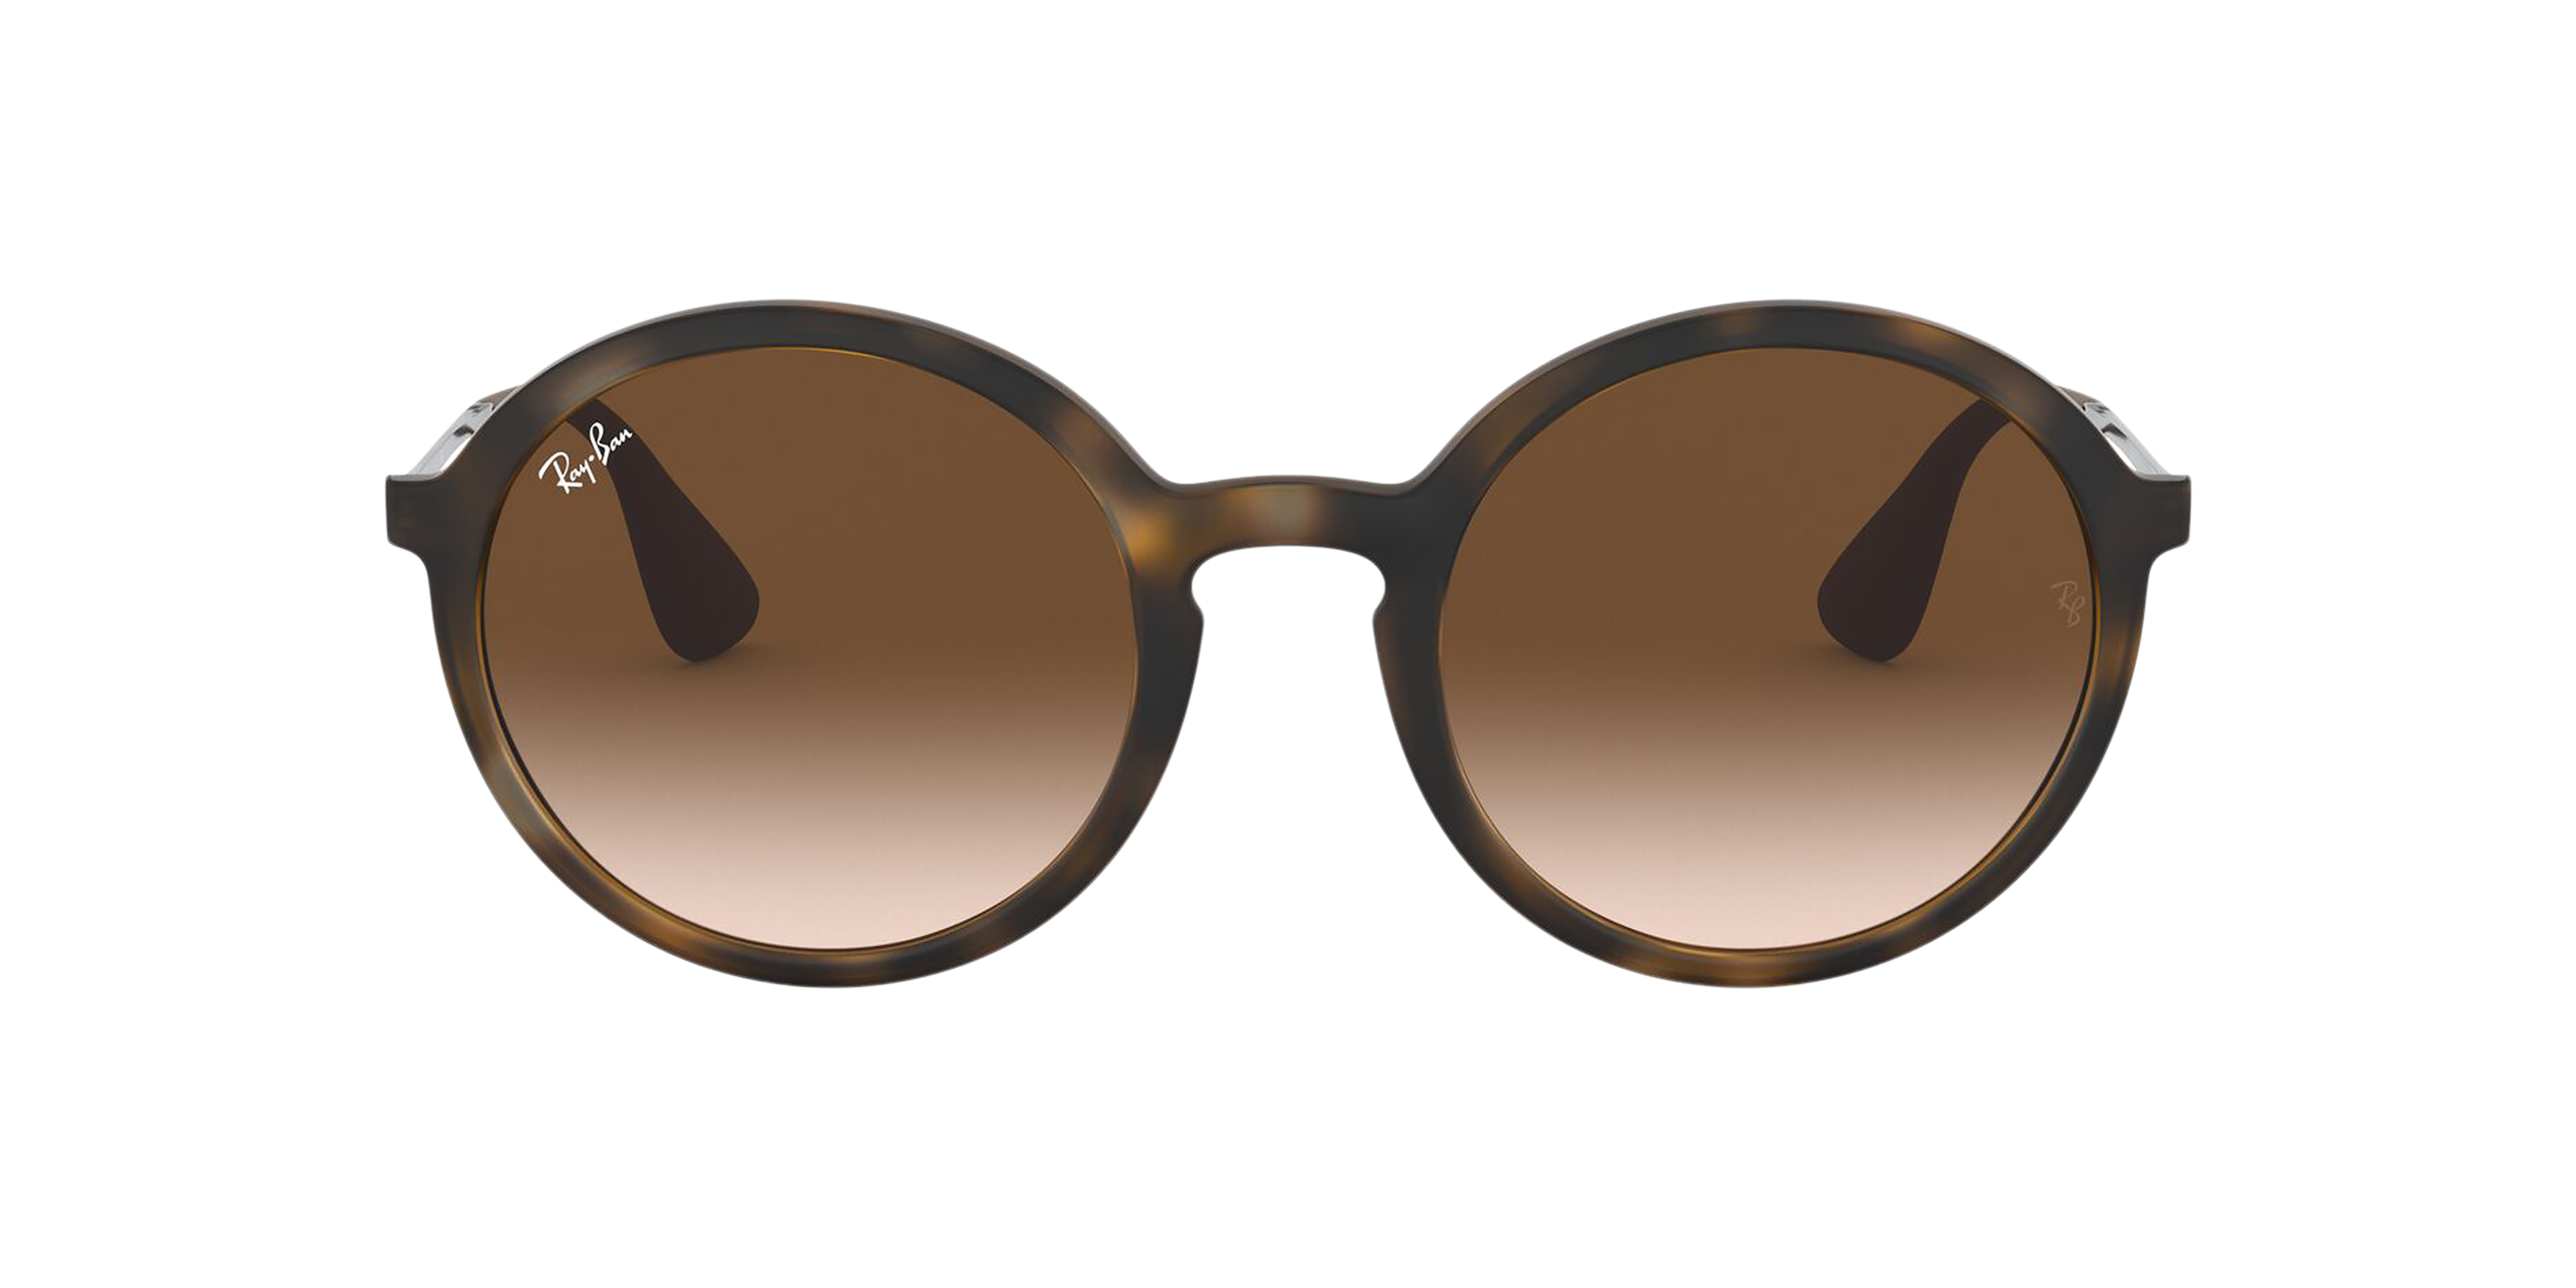 [products.image.front] Ray-Ban RB4222 865/13